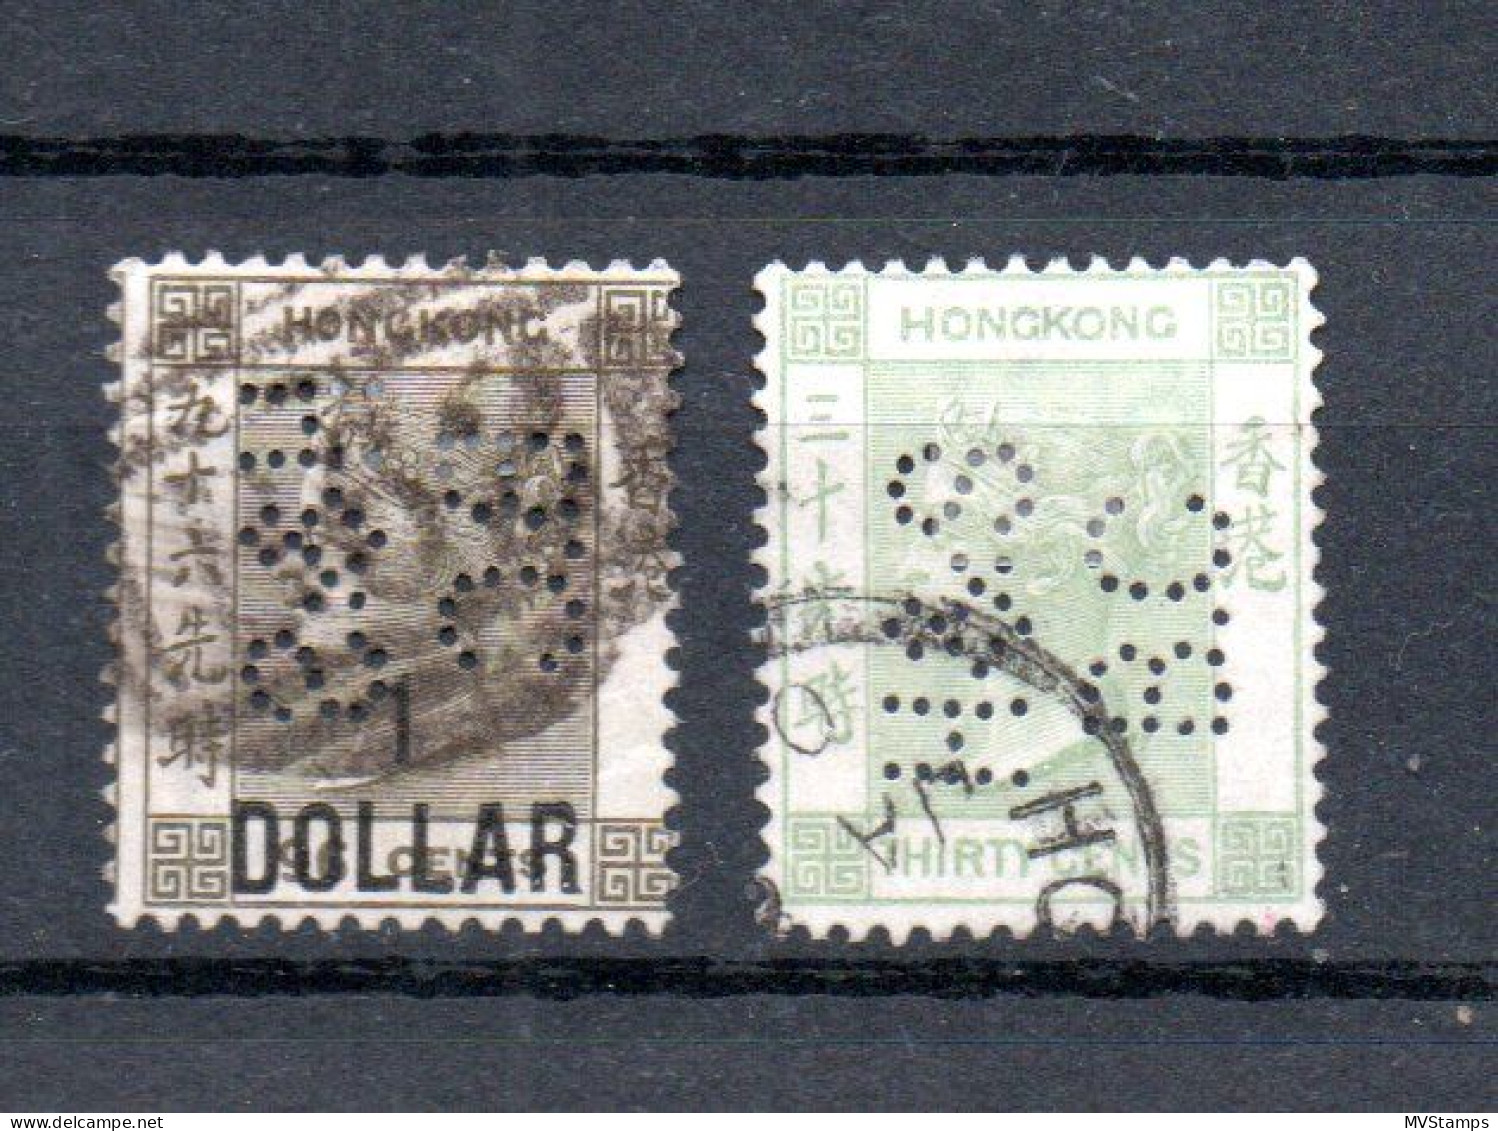 Hong Kong 1885/91 Old Def.Victoria Stamps With Perforation (HSBC) Nice Used - Usati